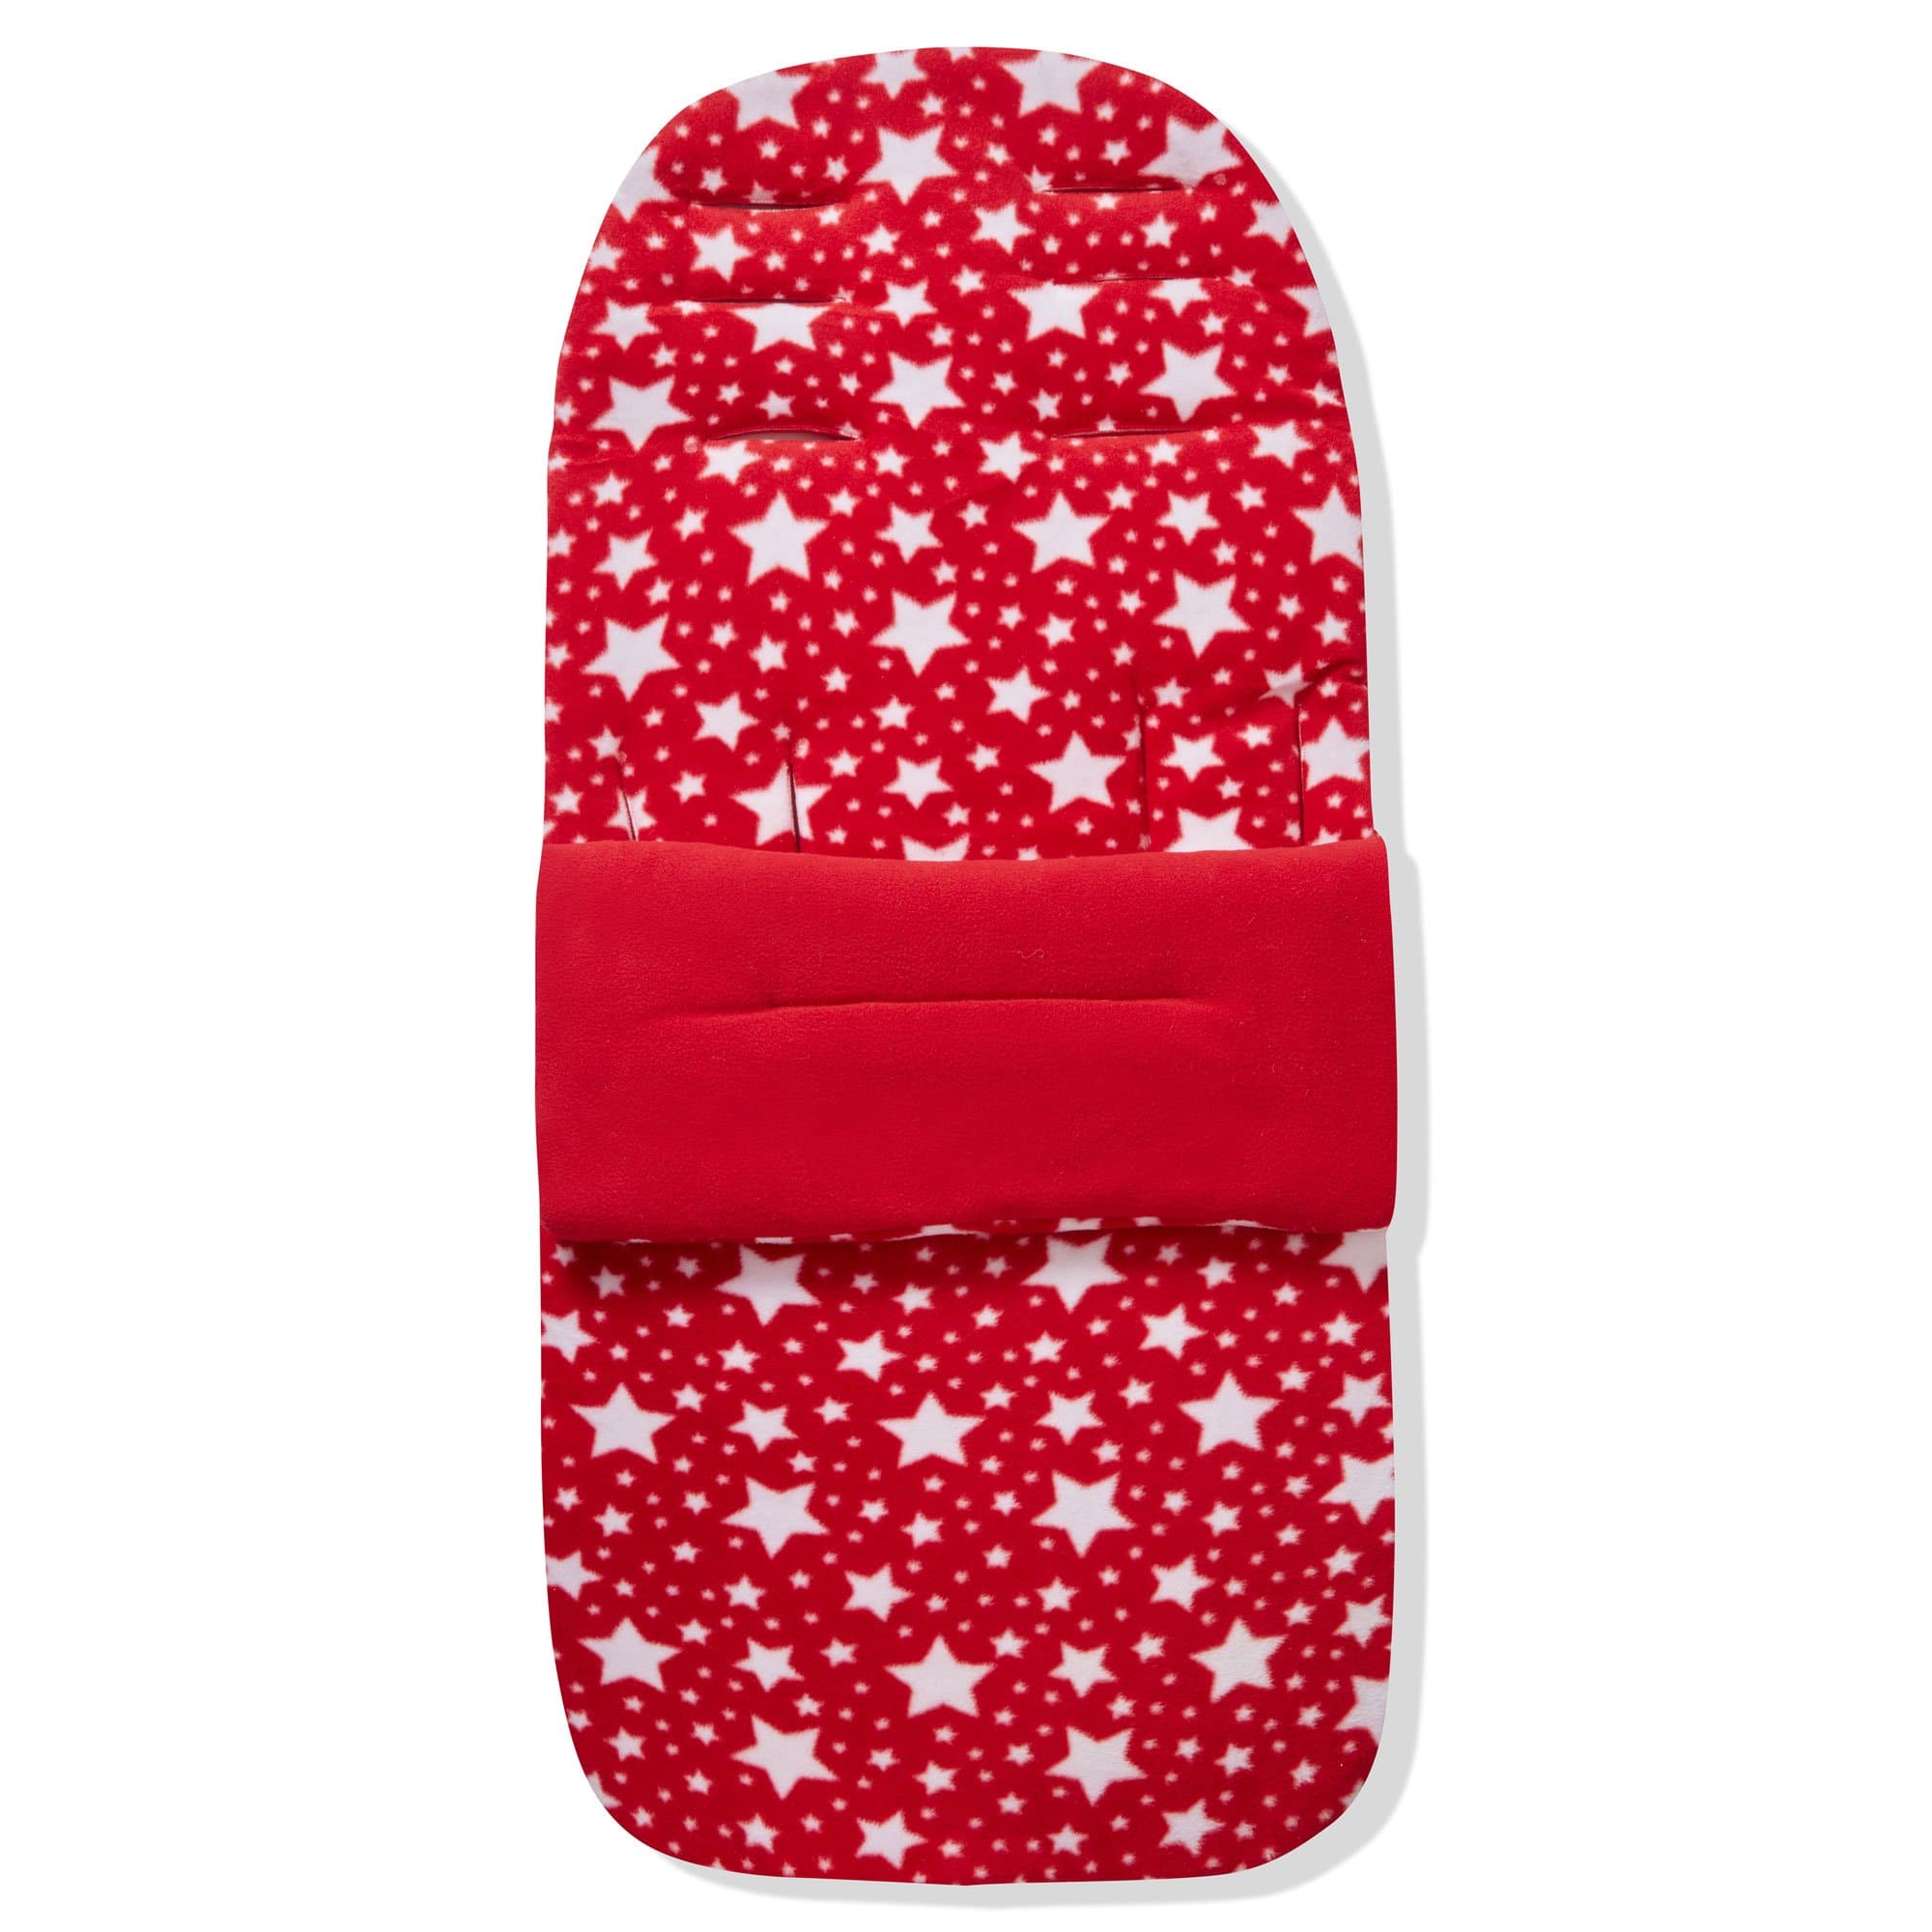 Fleece Footmuff / Cosy Toes Compatible With Chicco - Red Star / Fits All Models | For Your Little One